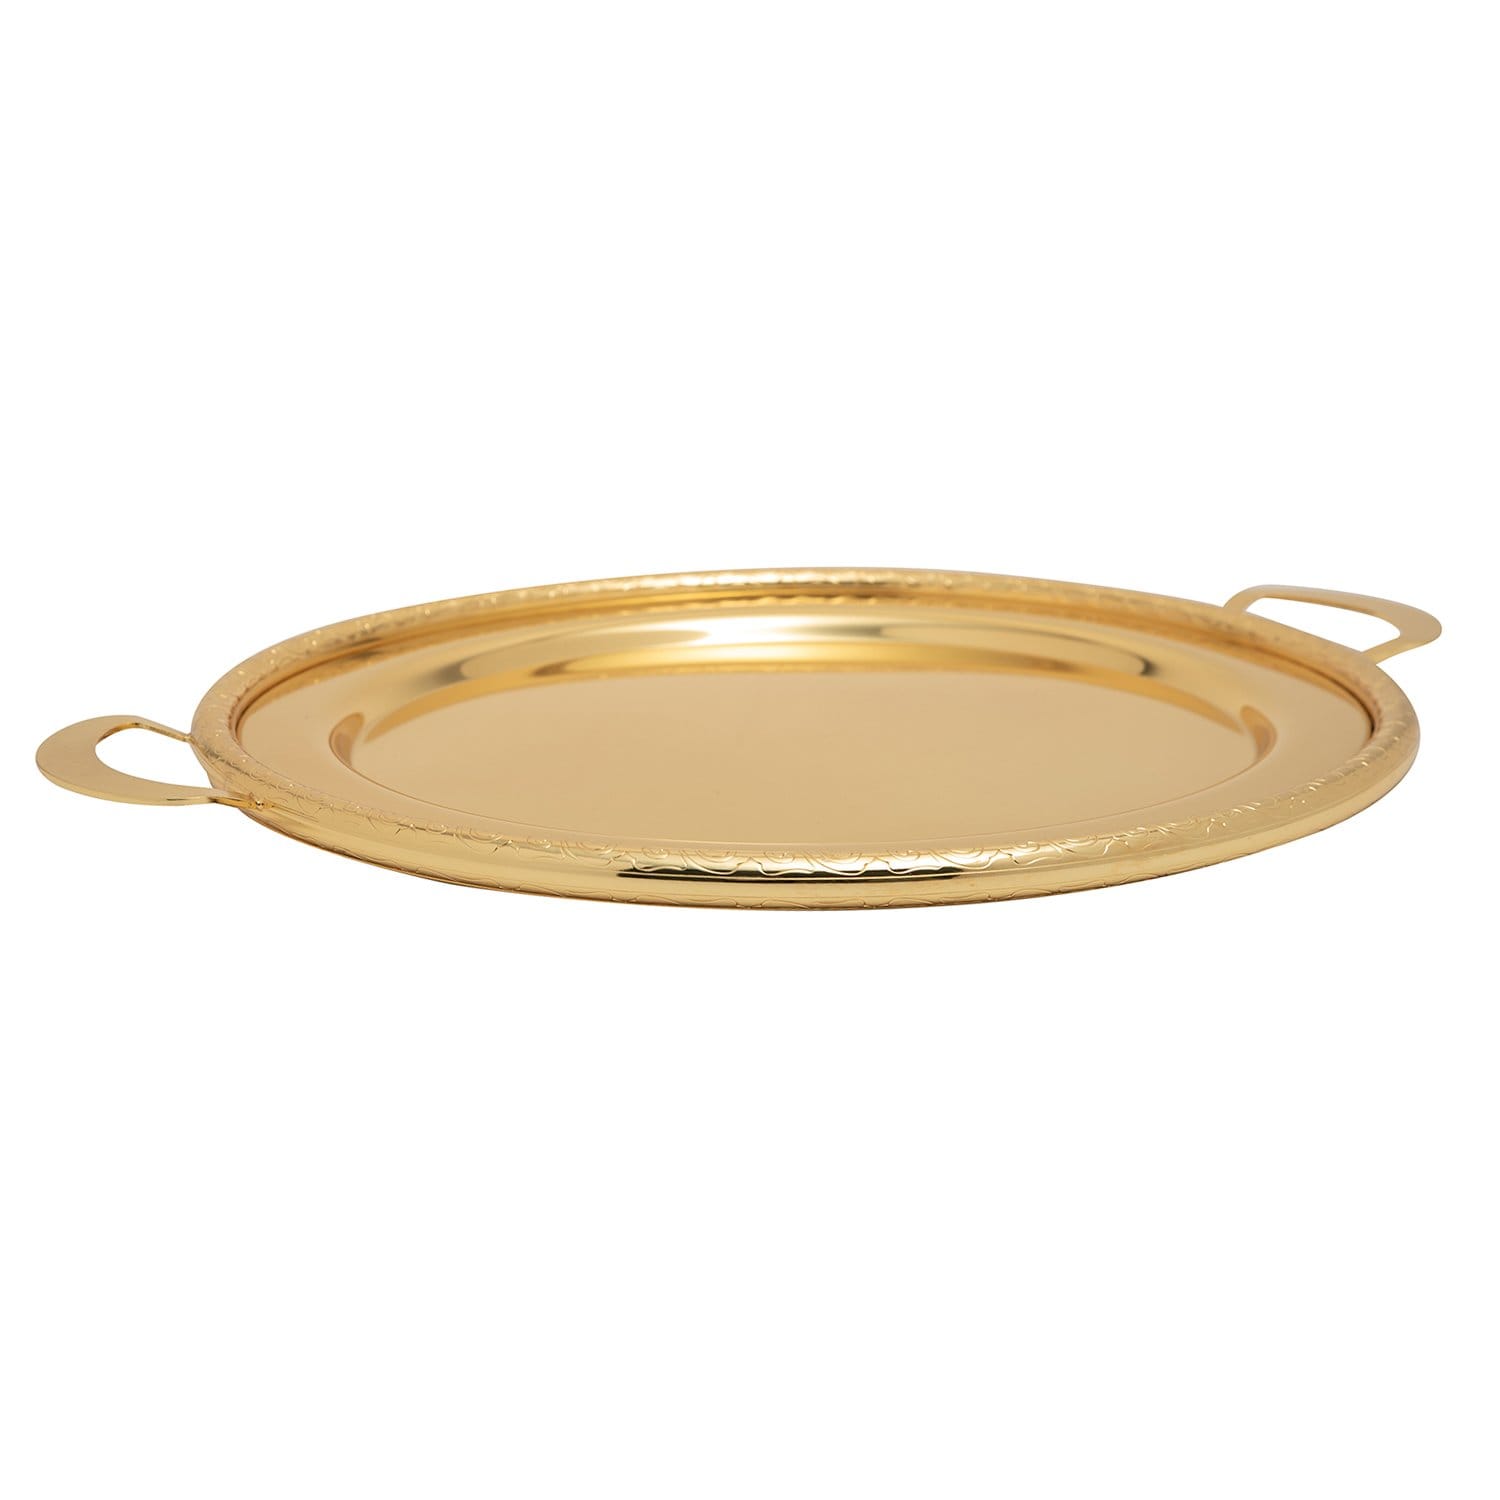 GOLD PLATED ROUND TRAY